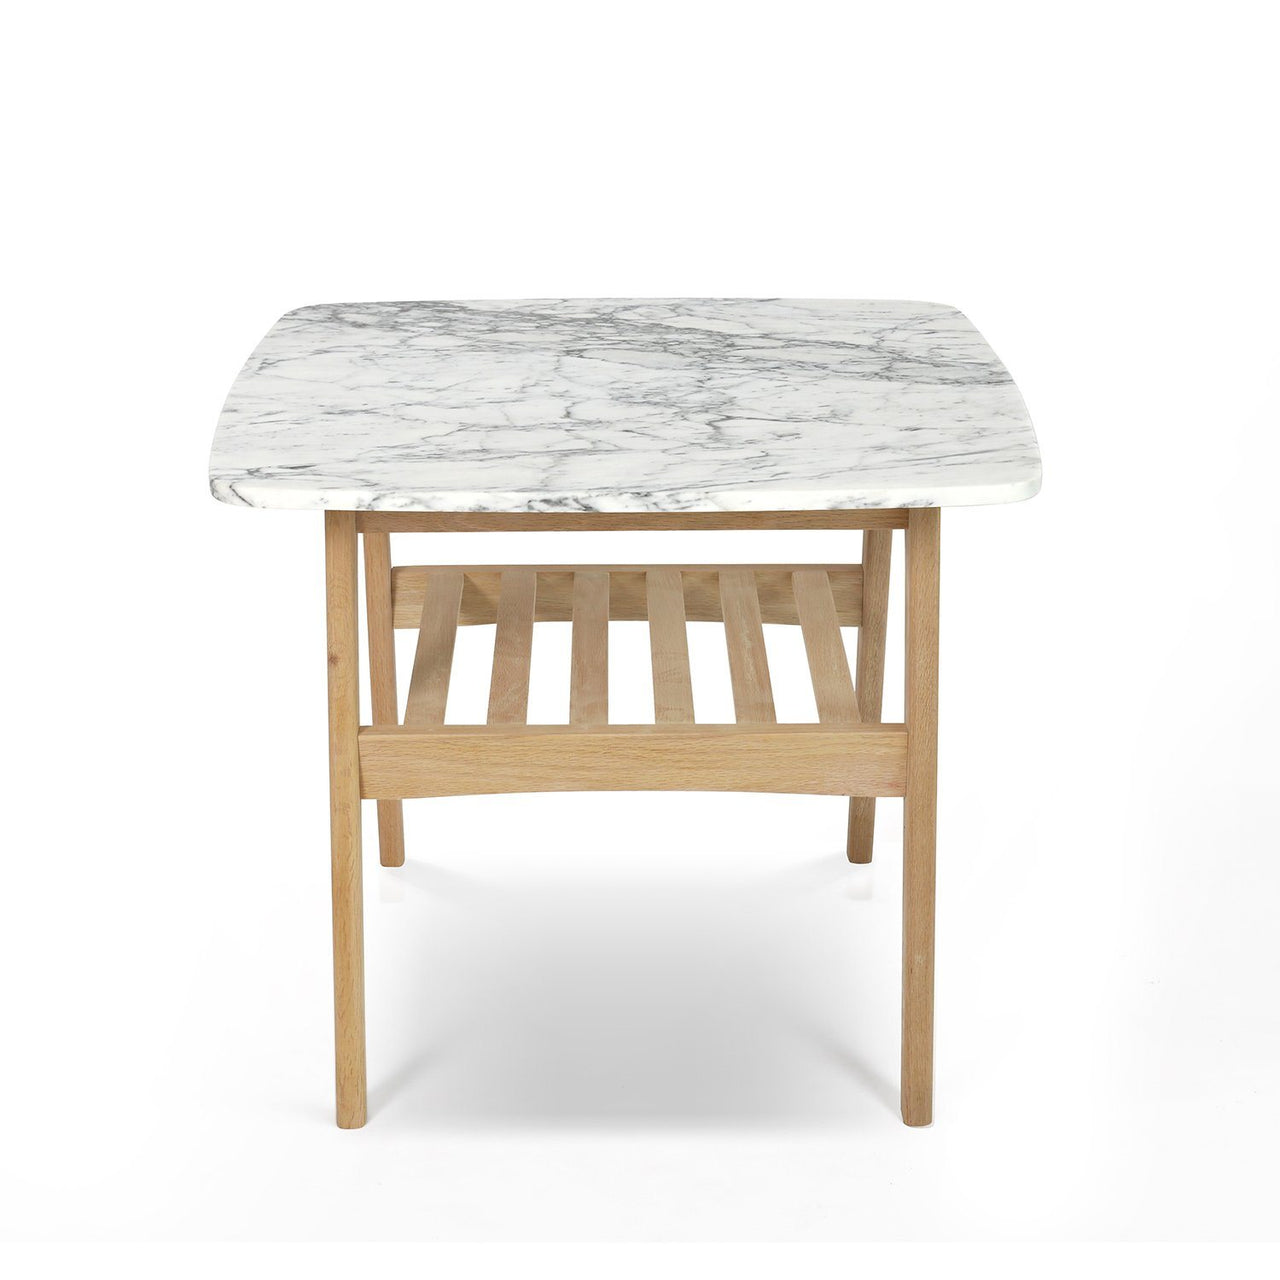 Cassoro 24" Square Italian Carrara White Marble Side Table with Shelf Side Table The Bianco Collection 